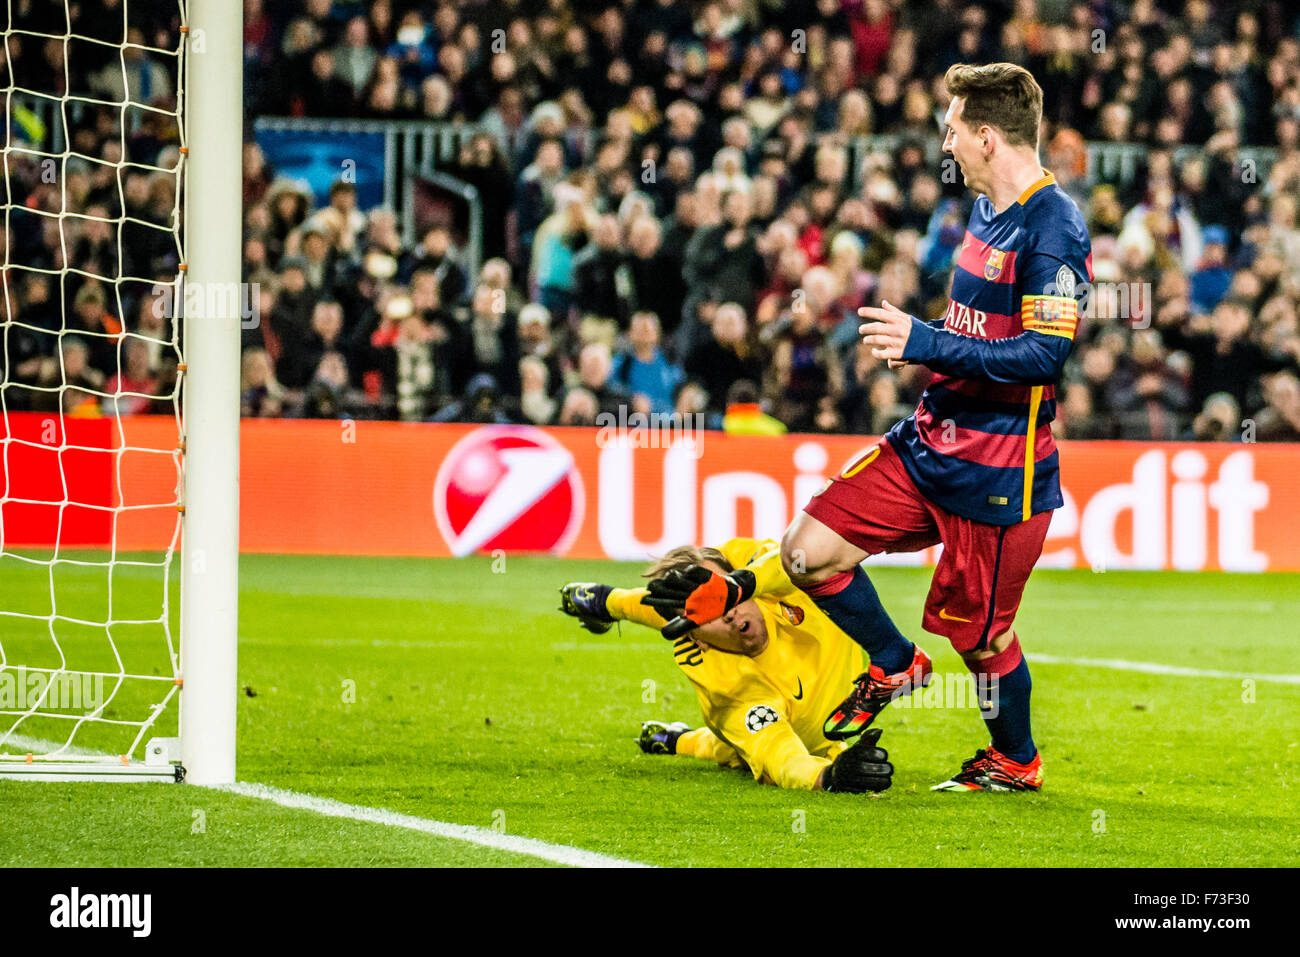 Barcelona, Spain. 24th Nov, 2015. FC Barcelona's forward MESSI scores his team's 5th goal during the Champions League match between FC Barcelona and AS Roma at the Camp Nou stadium in Barcelona Credit:  matthi/Alamy Live News Stock Photo